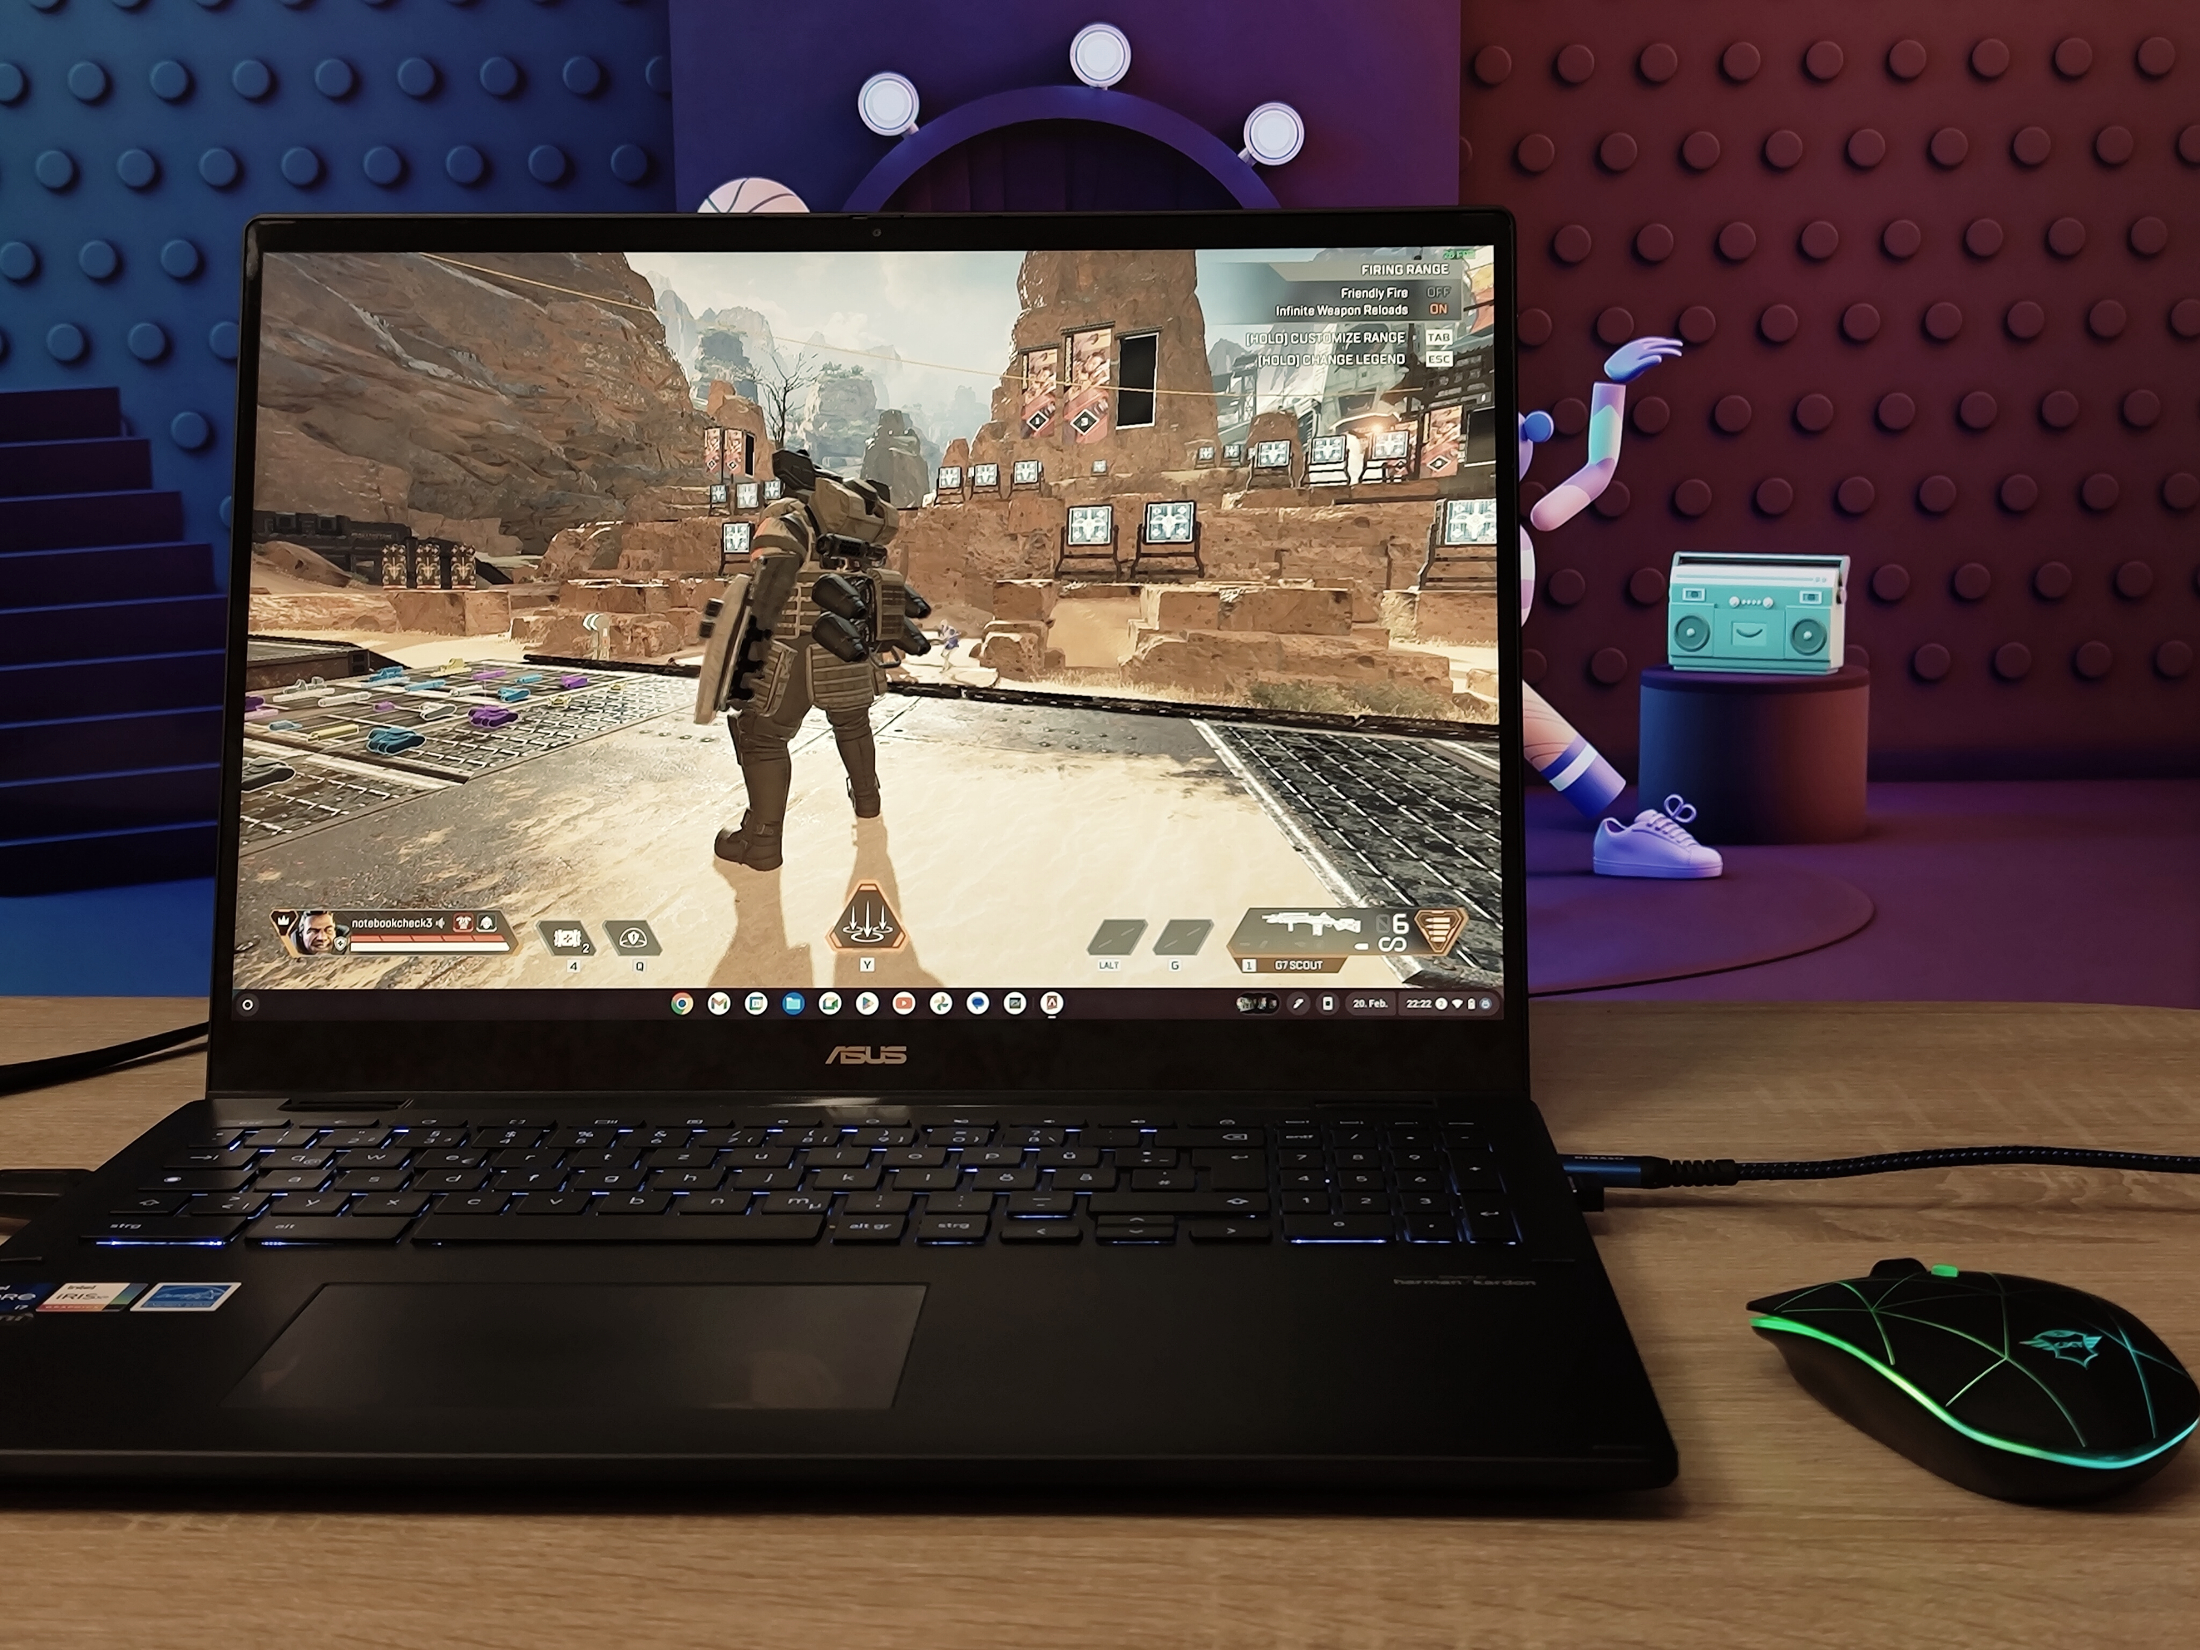 Windows 10: DirectX 12 is flexing its muscle in the Star Swarm